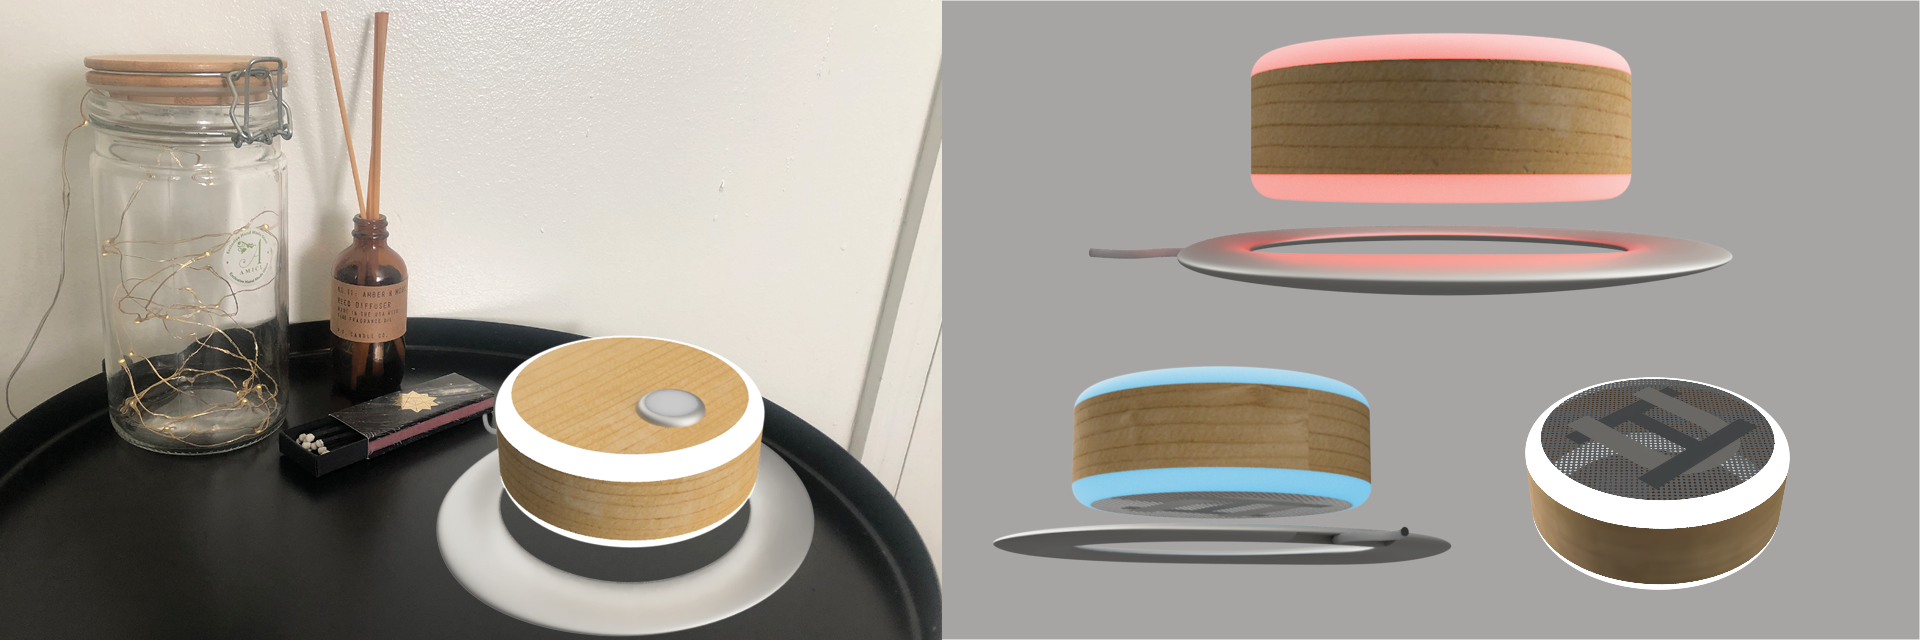 Renders of a smart circular object with a ring of status LED lights. 